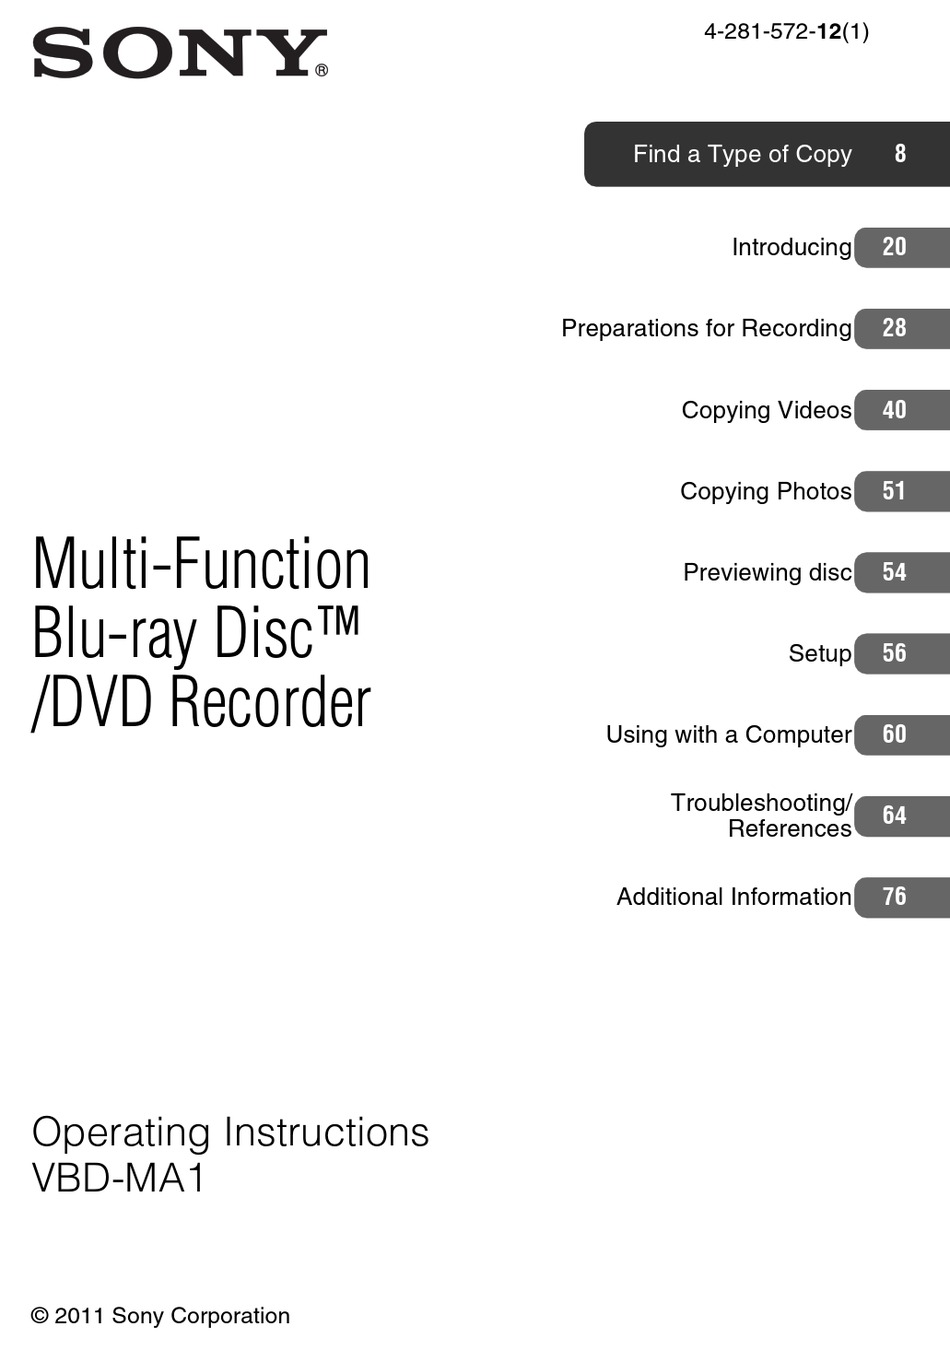 One Touch Disc Burn - Sony VBD-MA1 Operating Instructions Manual 